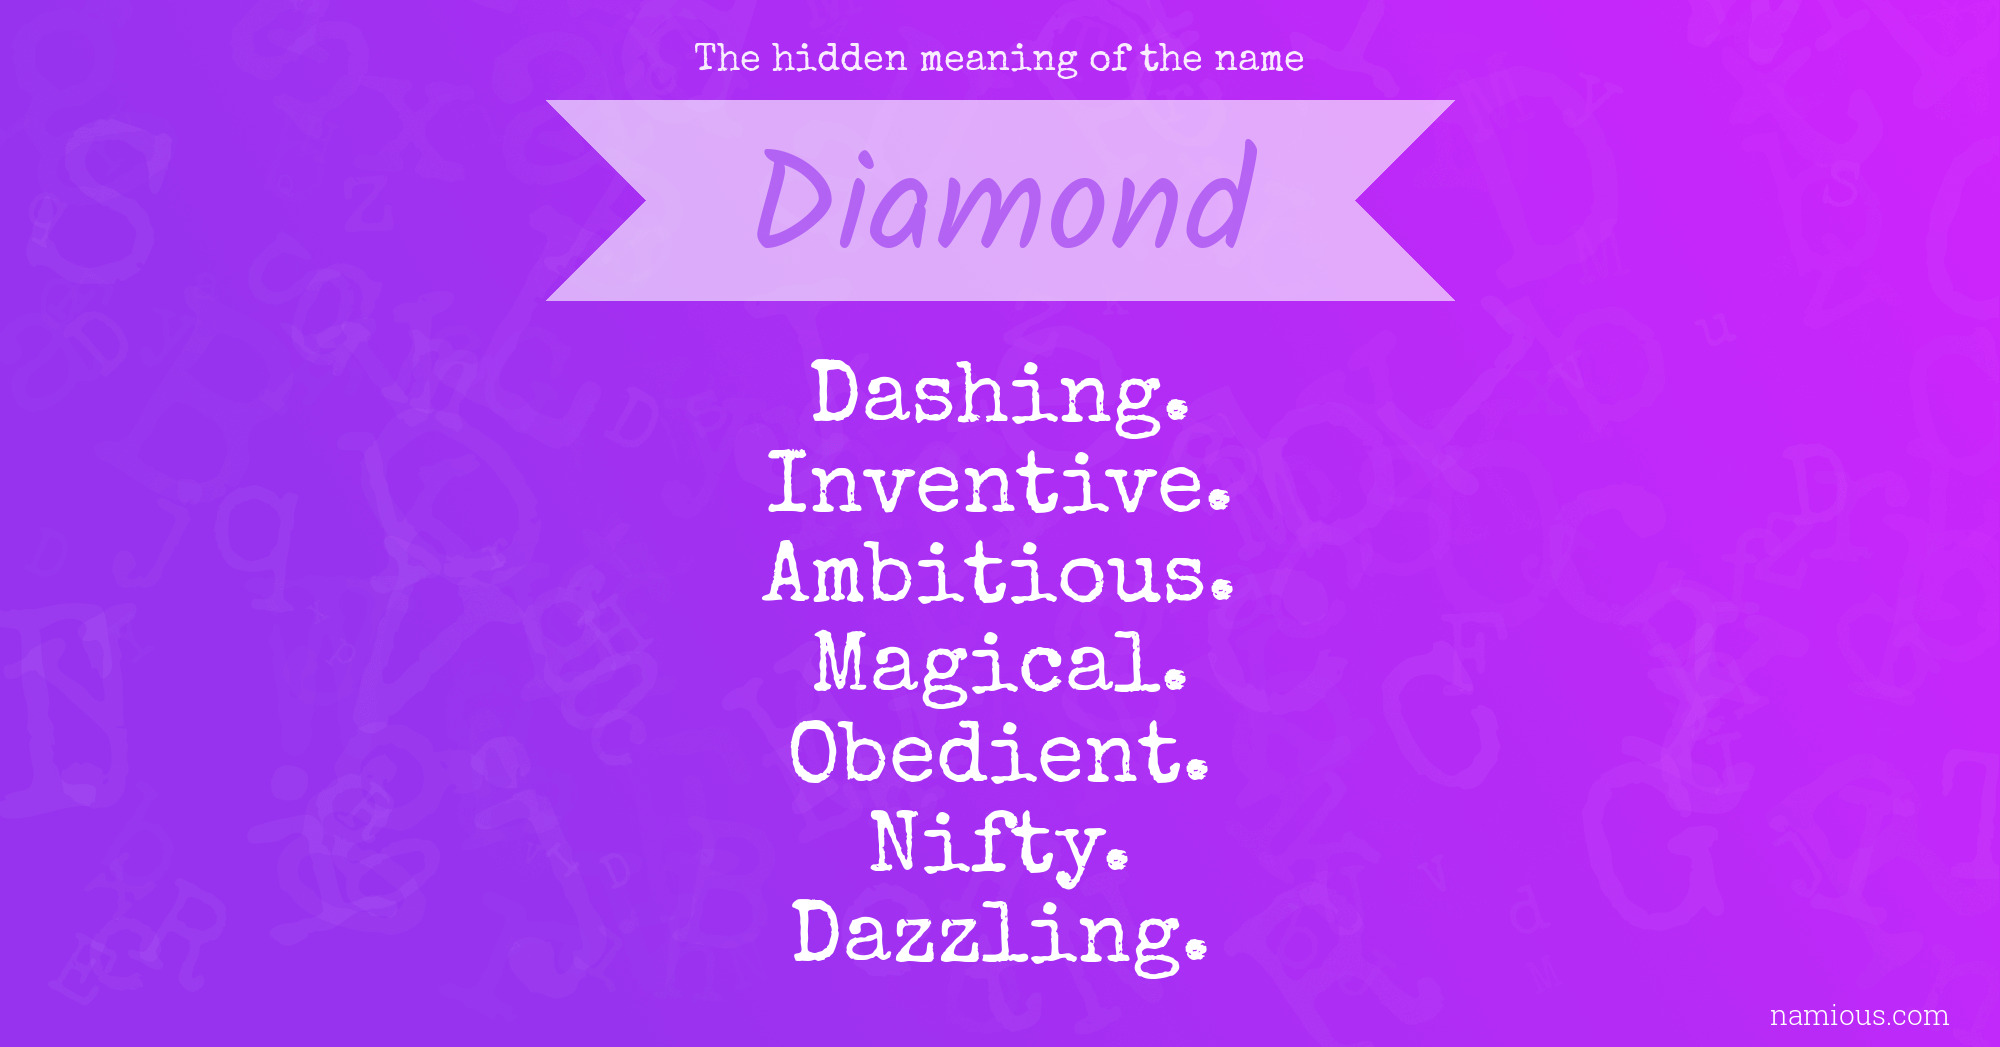 The hidden meaning of the name Diamond